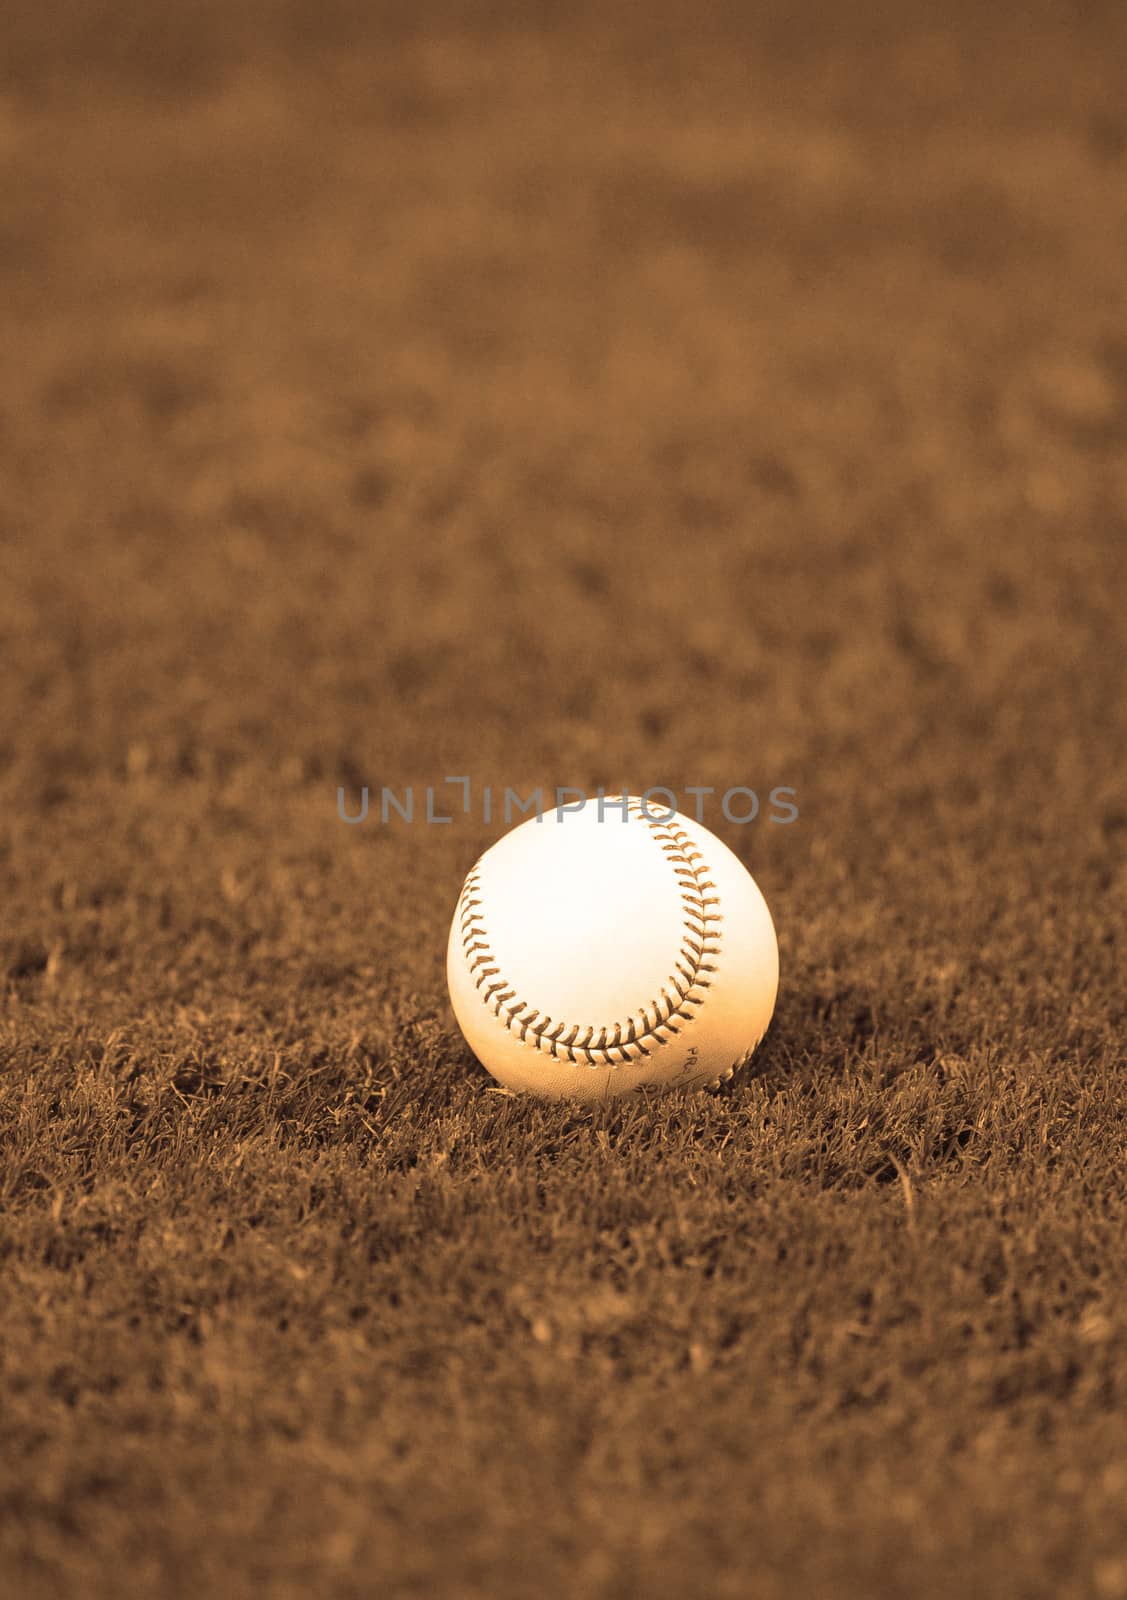 Baseball lying in grass field with nobody by ftlaudgirl